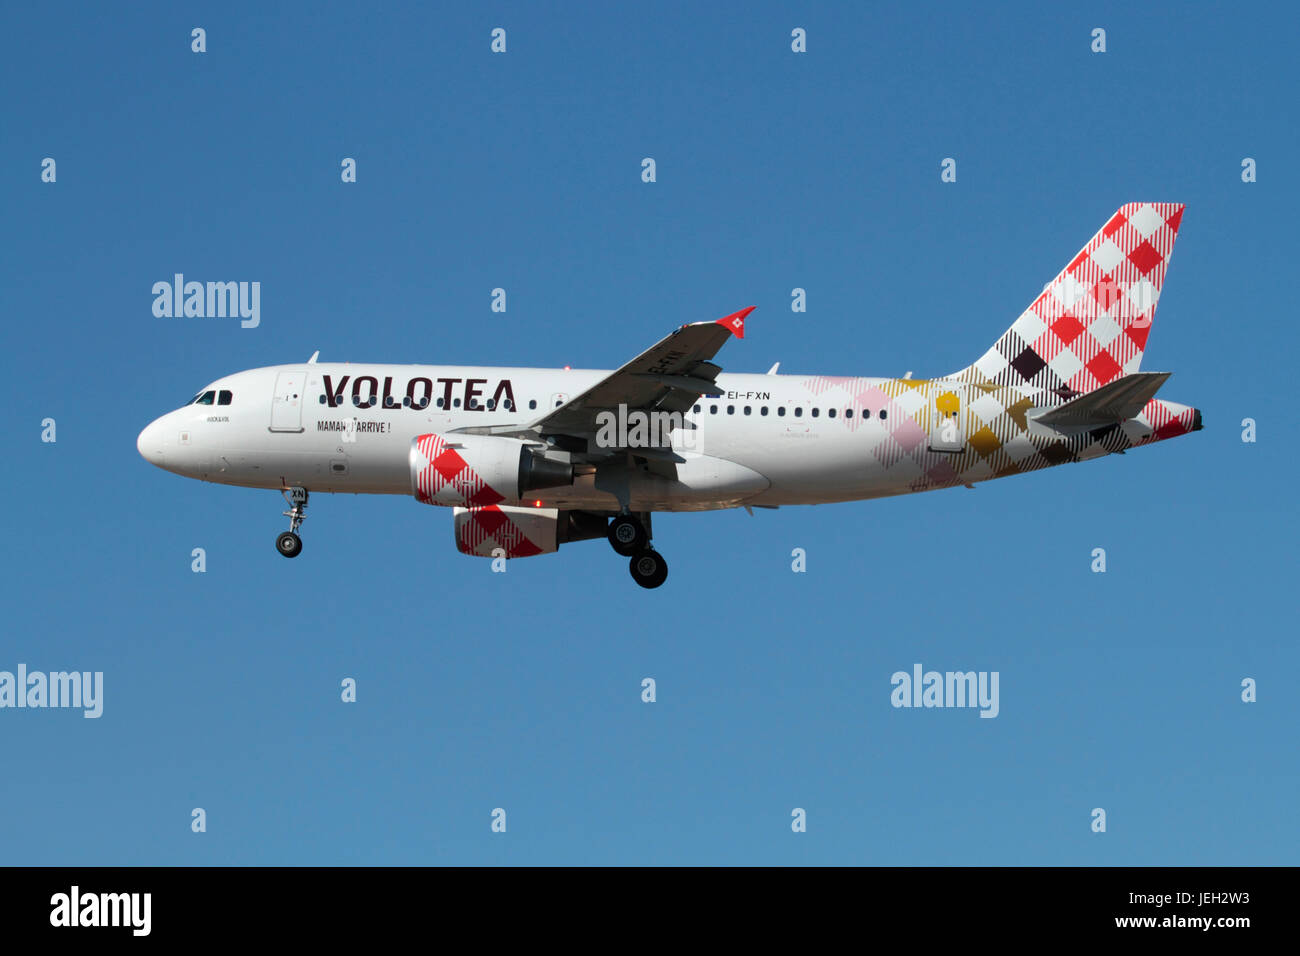 Commercial air travel. Airbus A319 airliner of the Spanish budget airline Volotea on approach Stock Photo